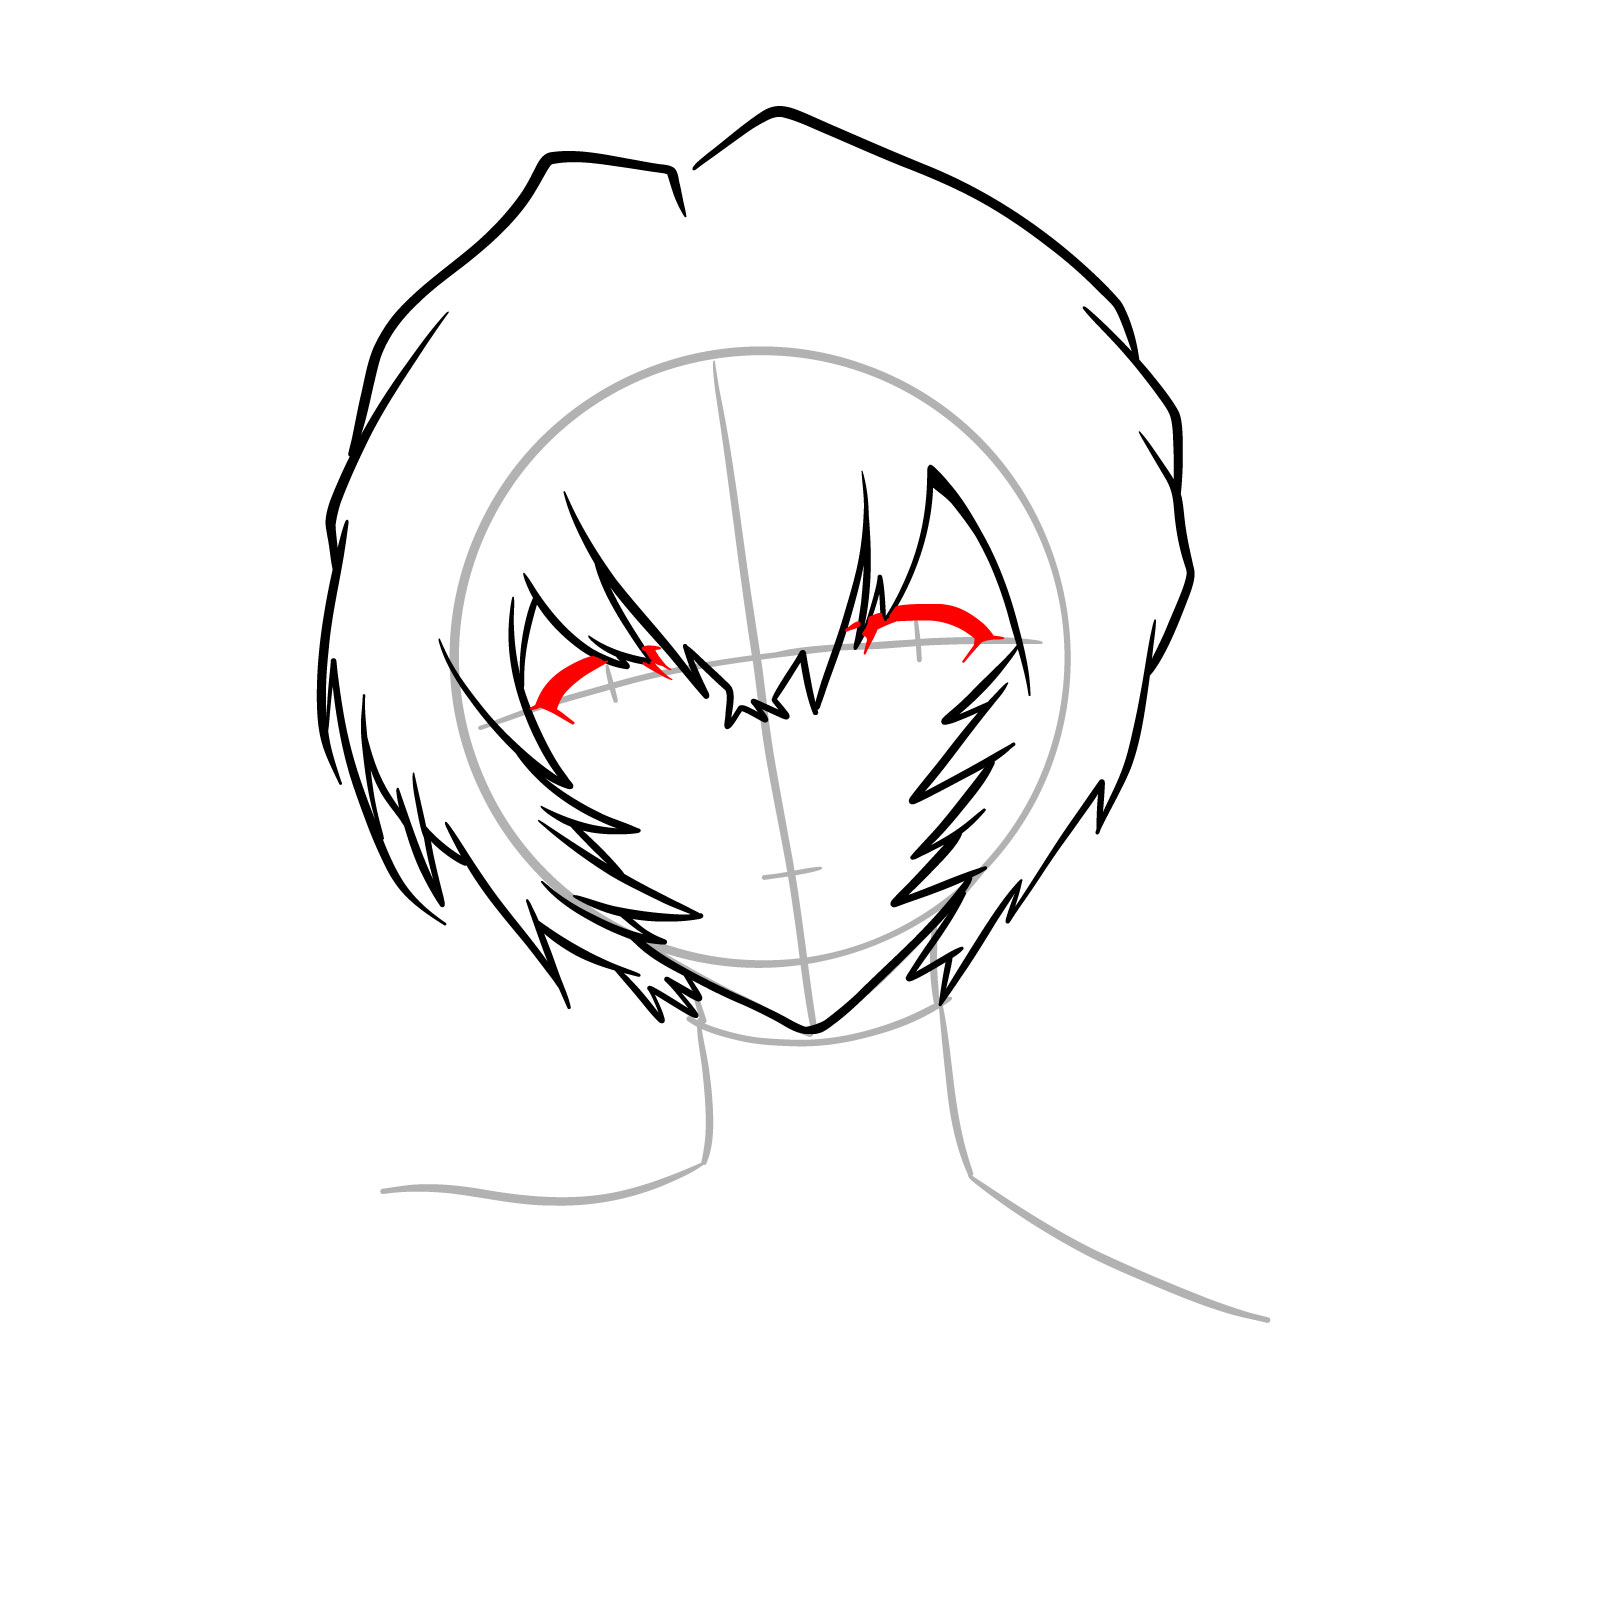 How to draw Rei Ayanami's face - Evangelion - step 09